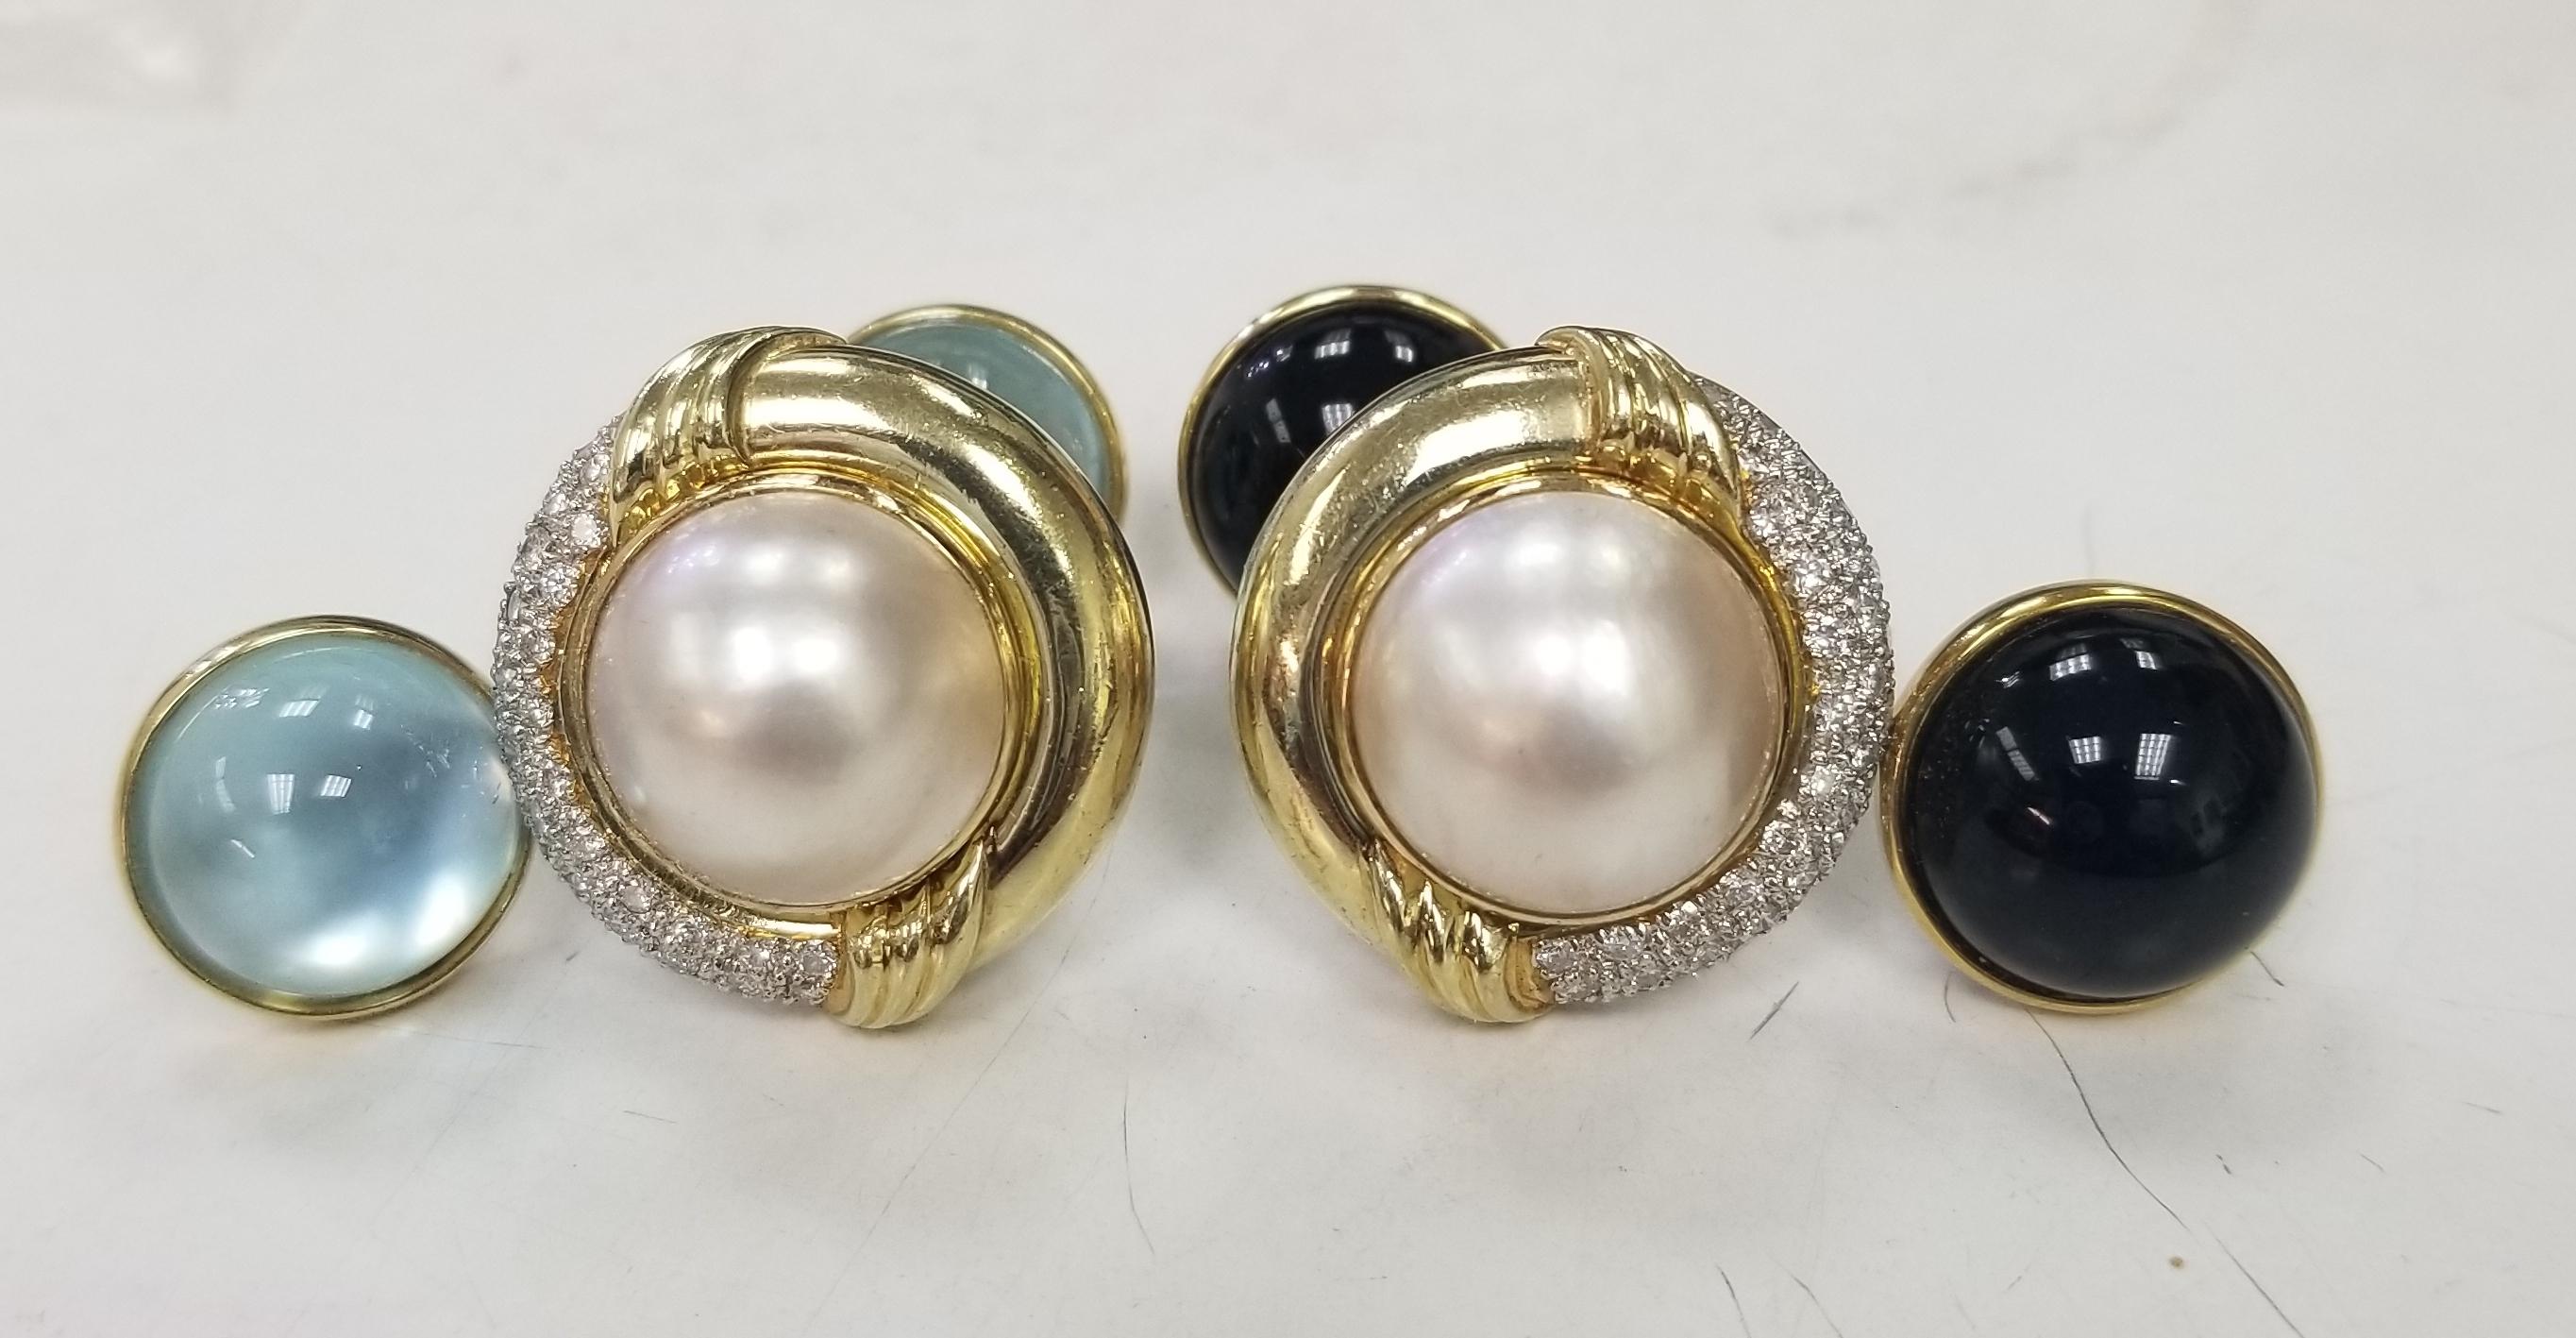 Cabochon 14k Yg Earrings with Diamonds and Interchangeable Mabe Pearl, Blue Topaz & Onyx